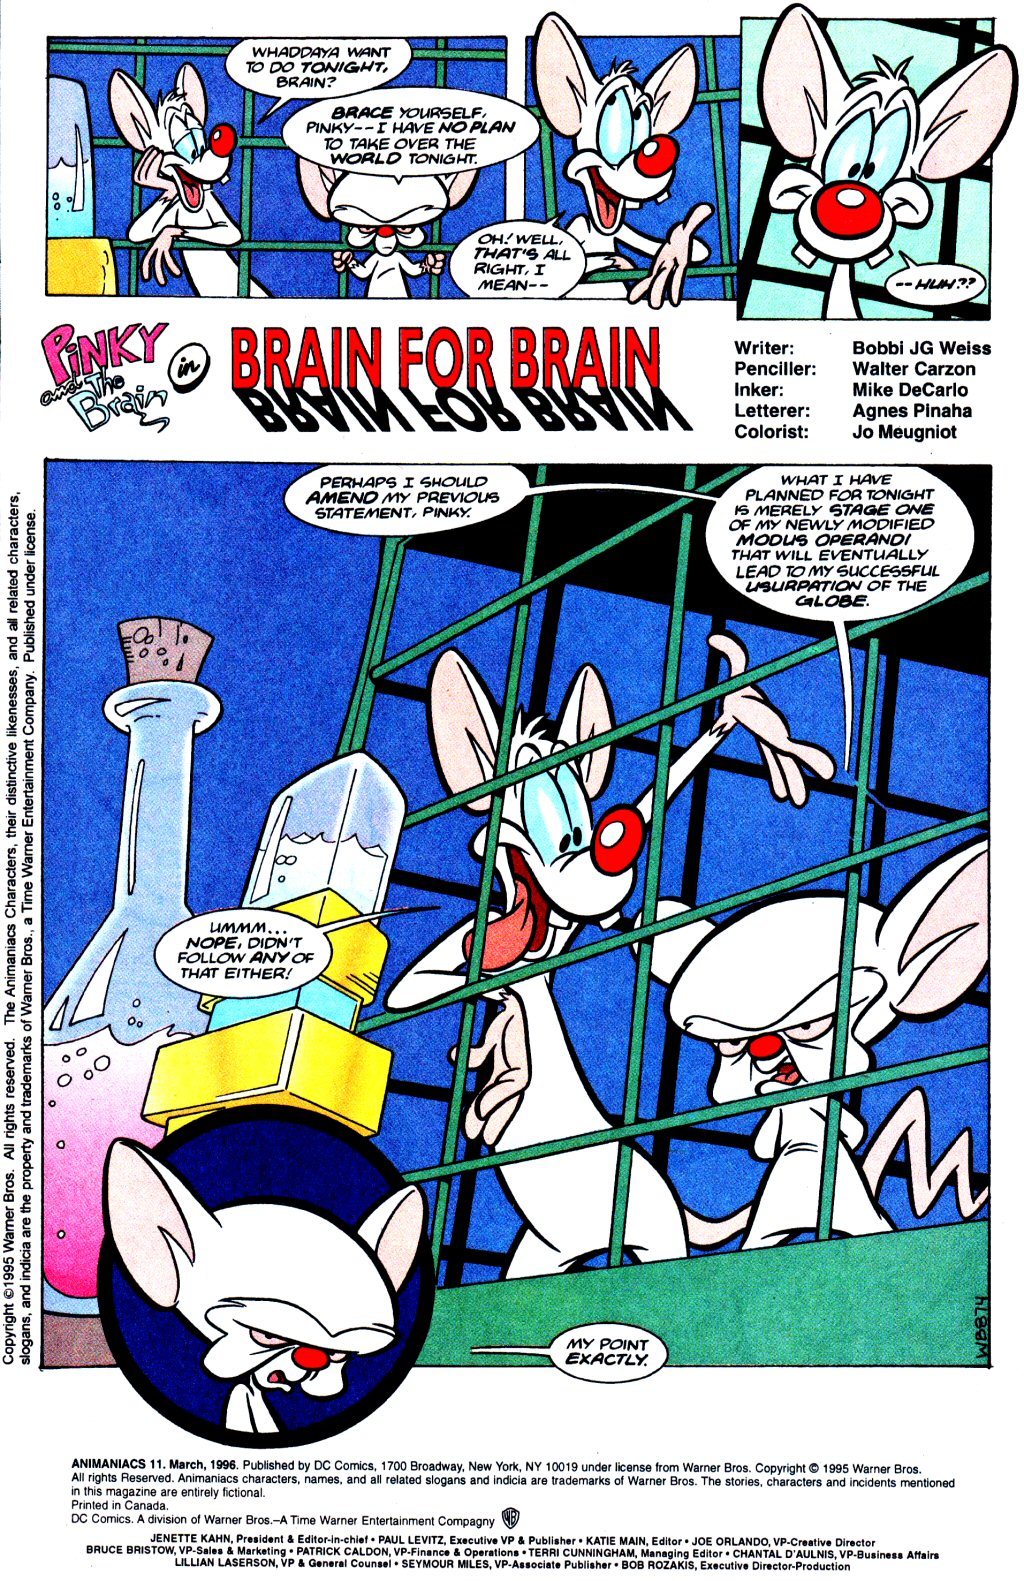 Animaniacs Issue 11 | Read Animaniacs Issue 11 comic online in high  quality. Read Full Comic online for free - Read comics online in high  quality .